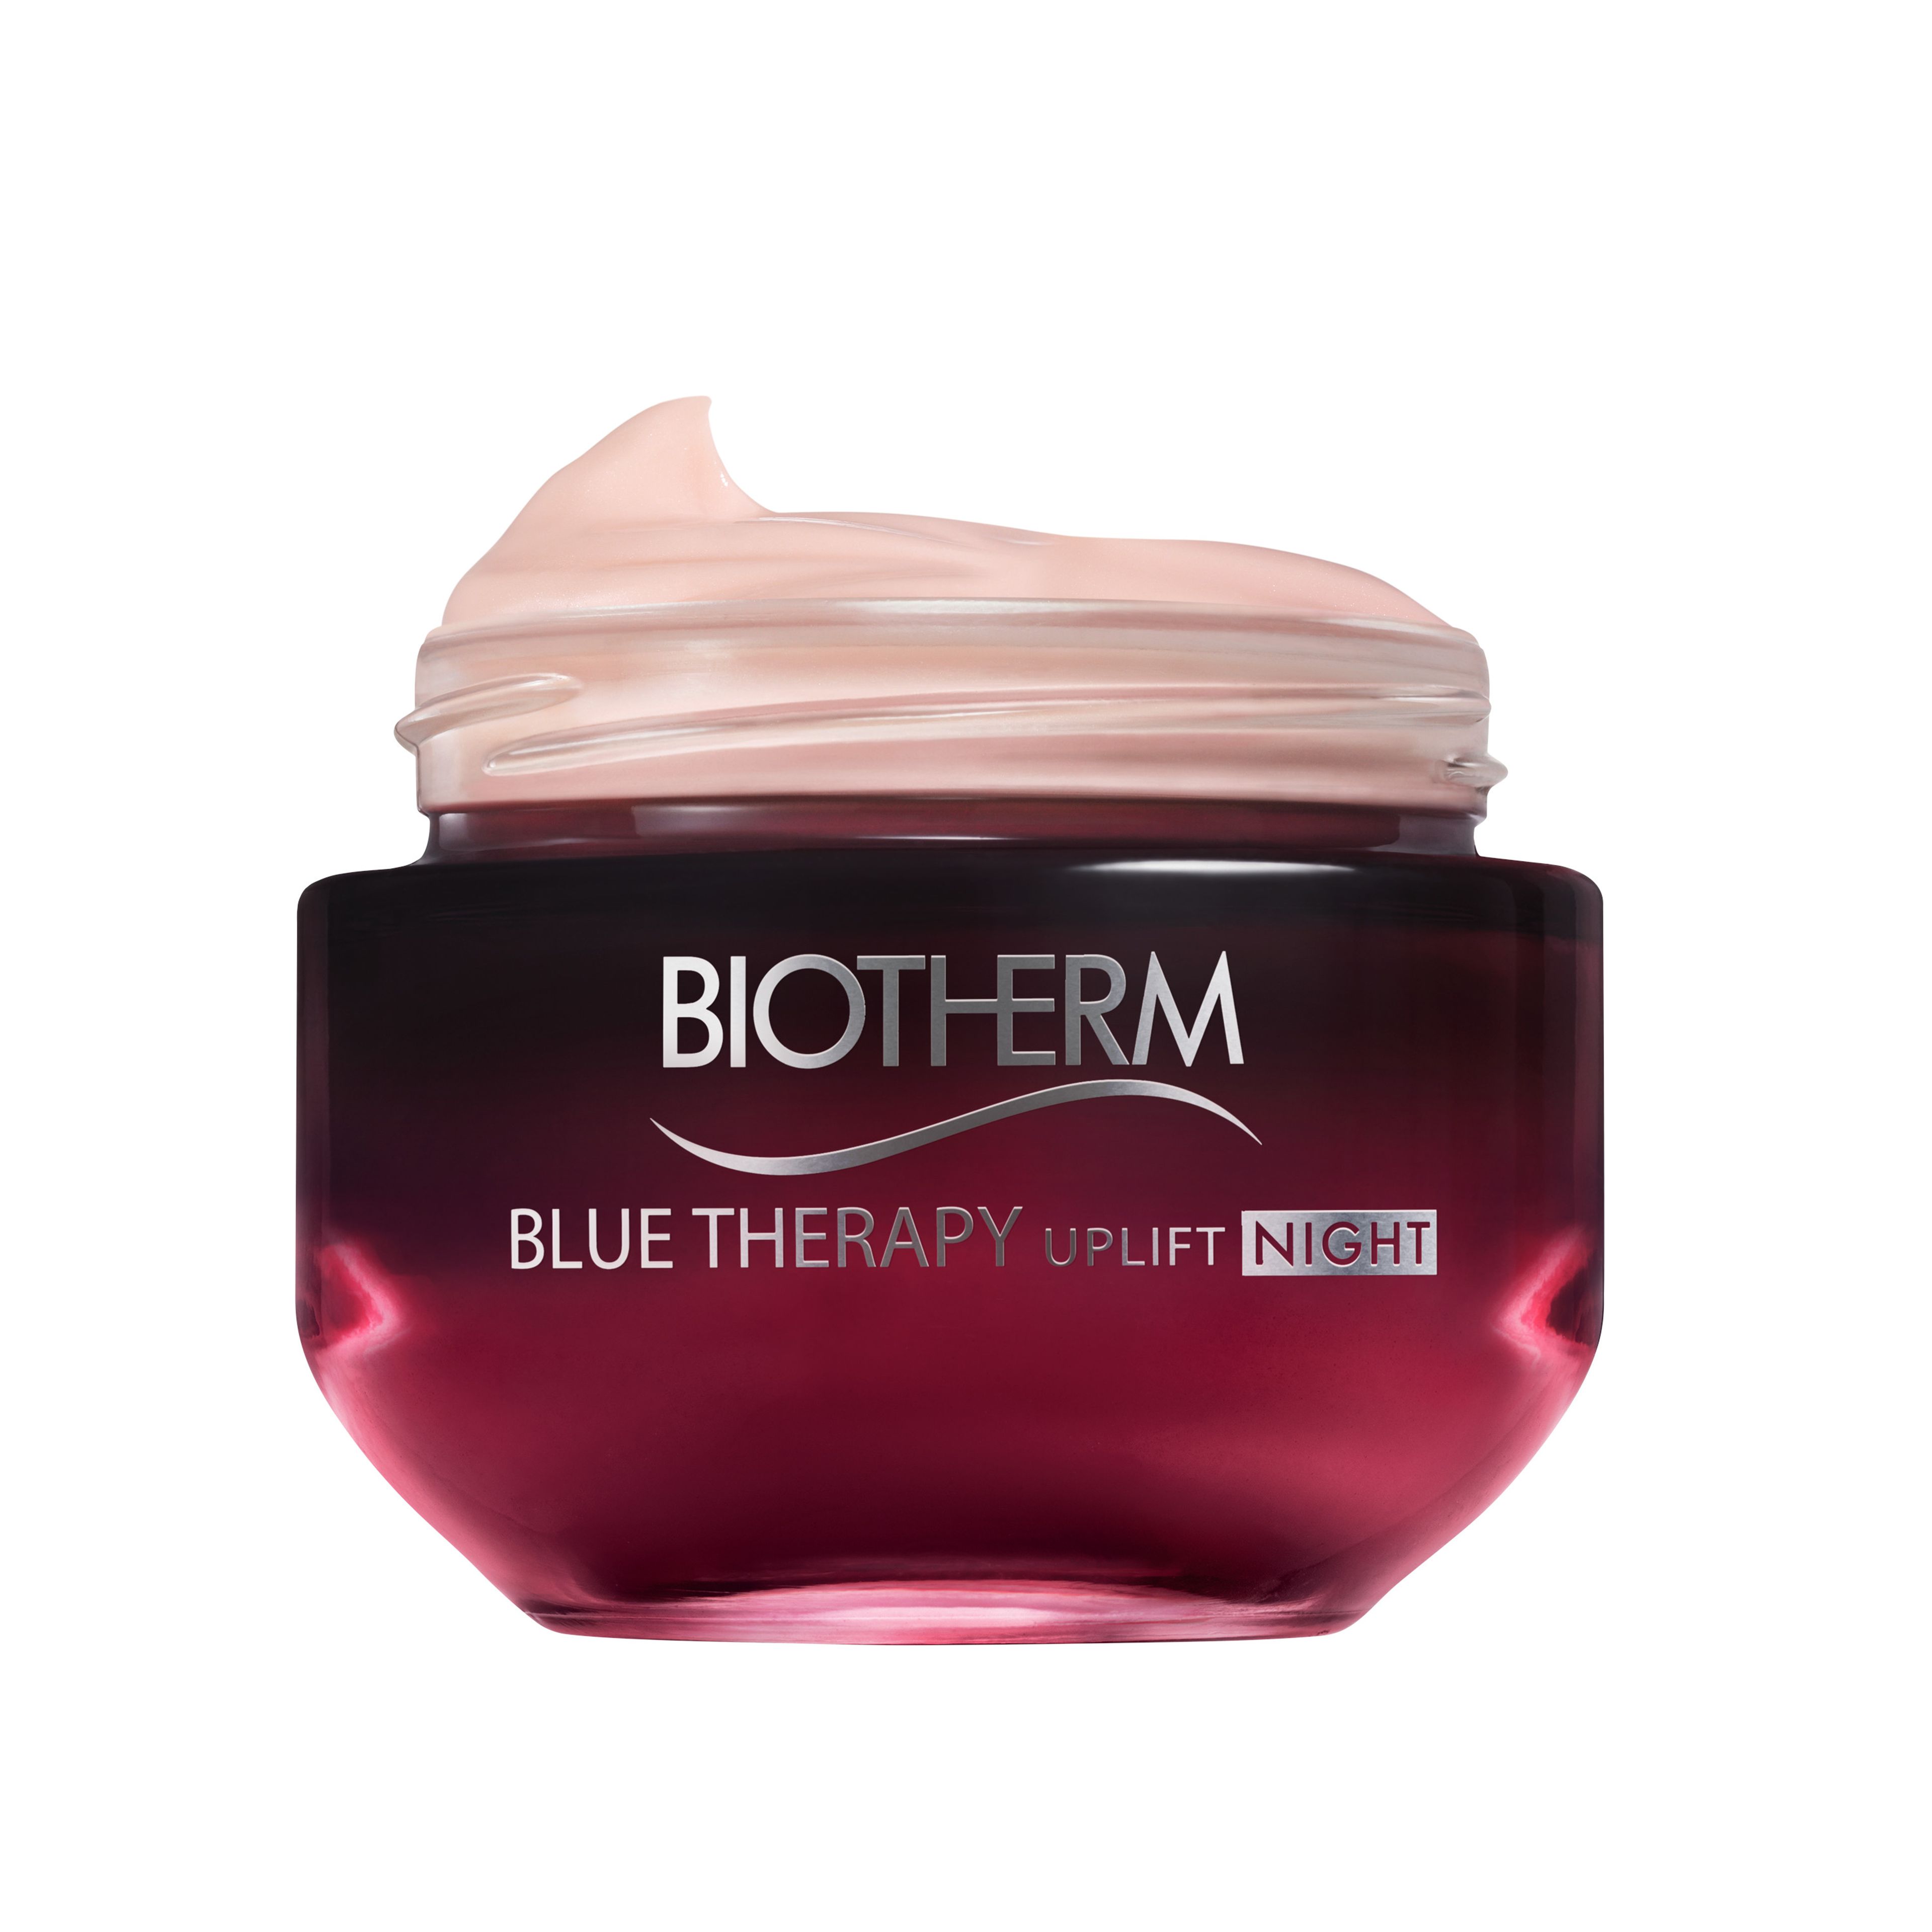 Biotherm Blue Therapy Red Algae Uplift Crema Notte 2